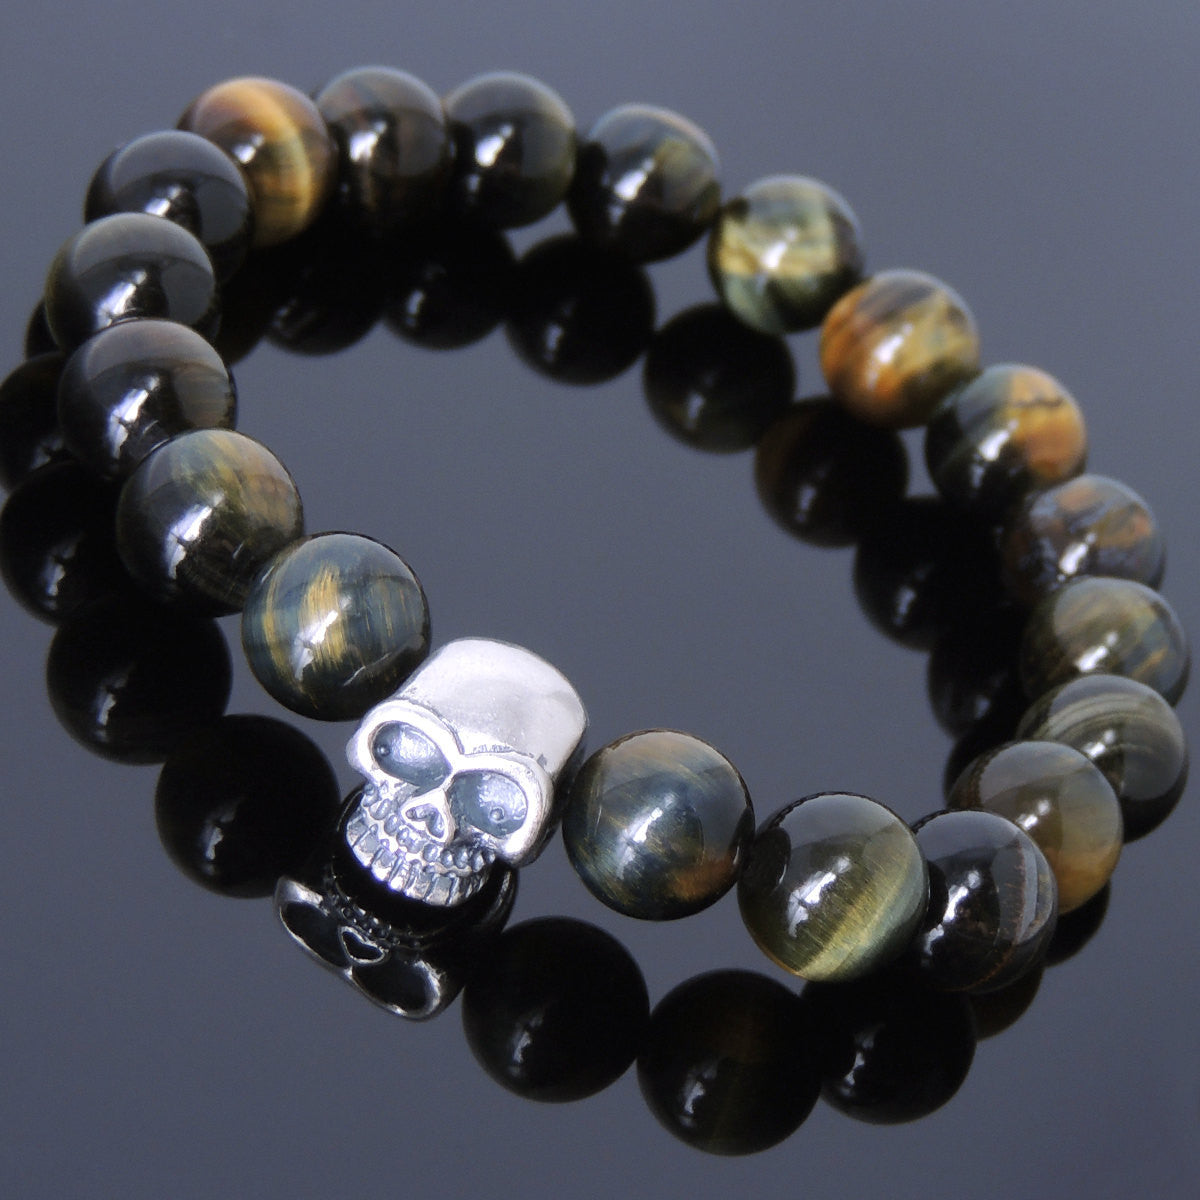 10mm Brown Blue Tiger Eye Healing Gemstone Bracelet with S925 Sterling Silver Protection Skull Charm - Handmade by Gem & Silver BR605